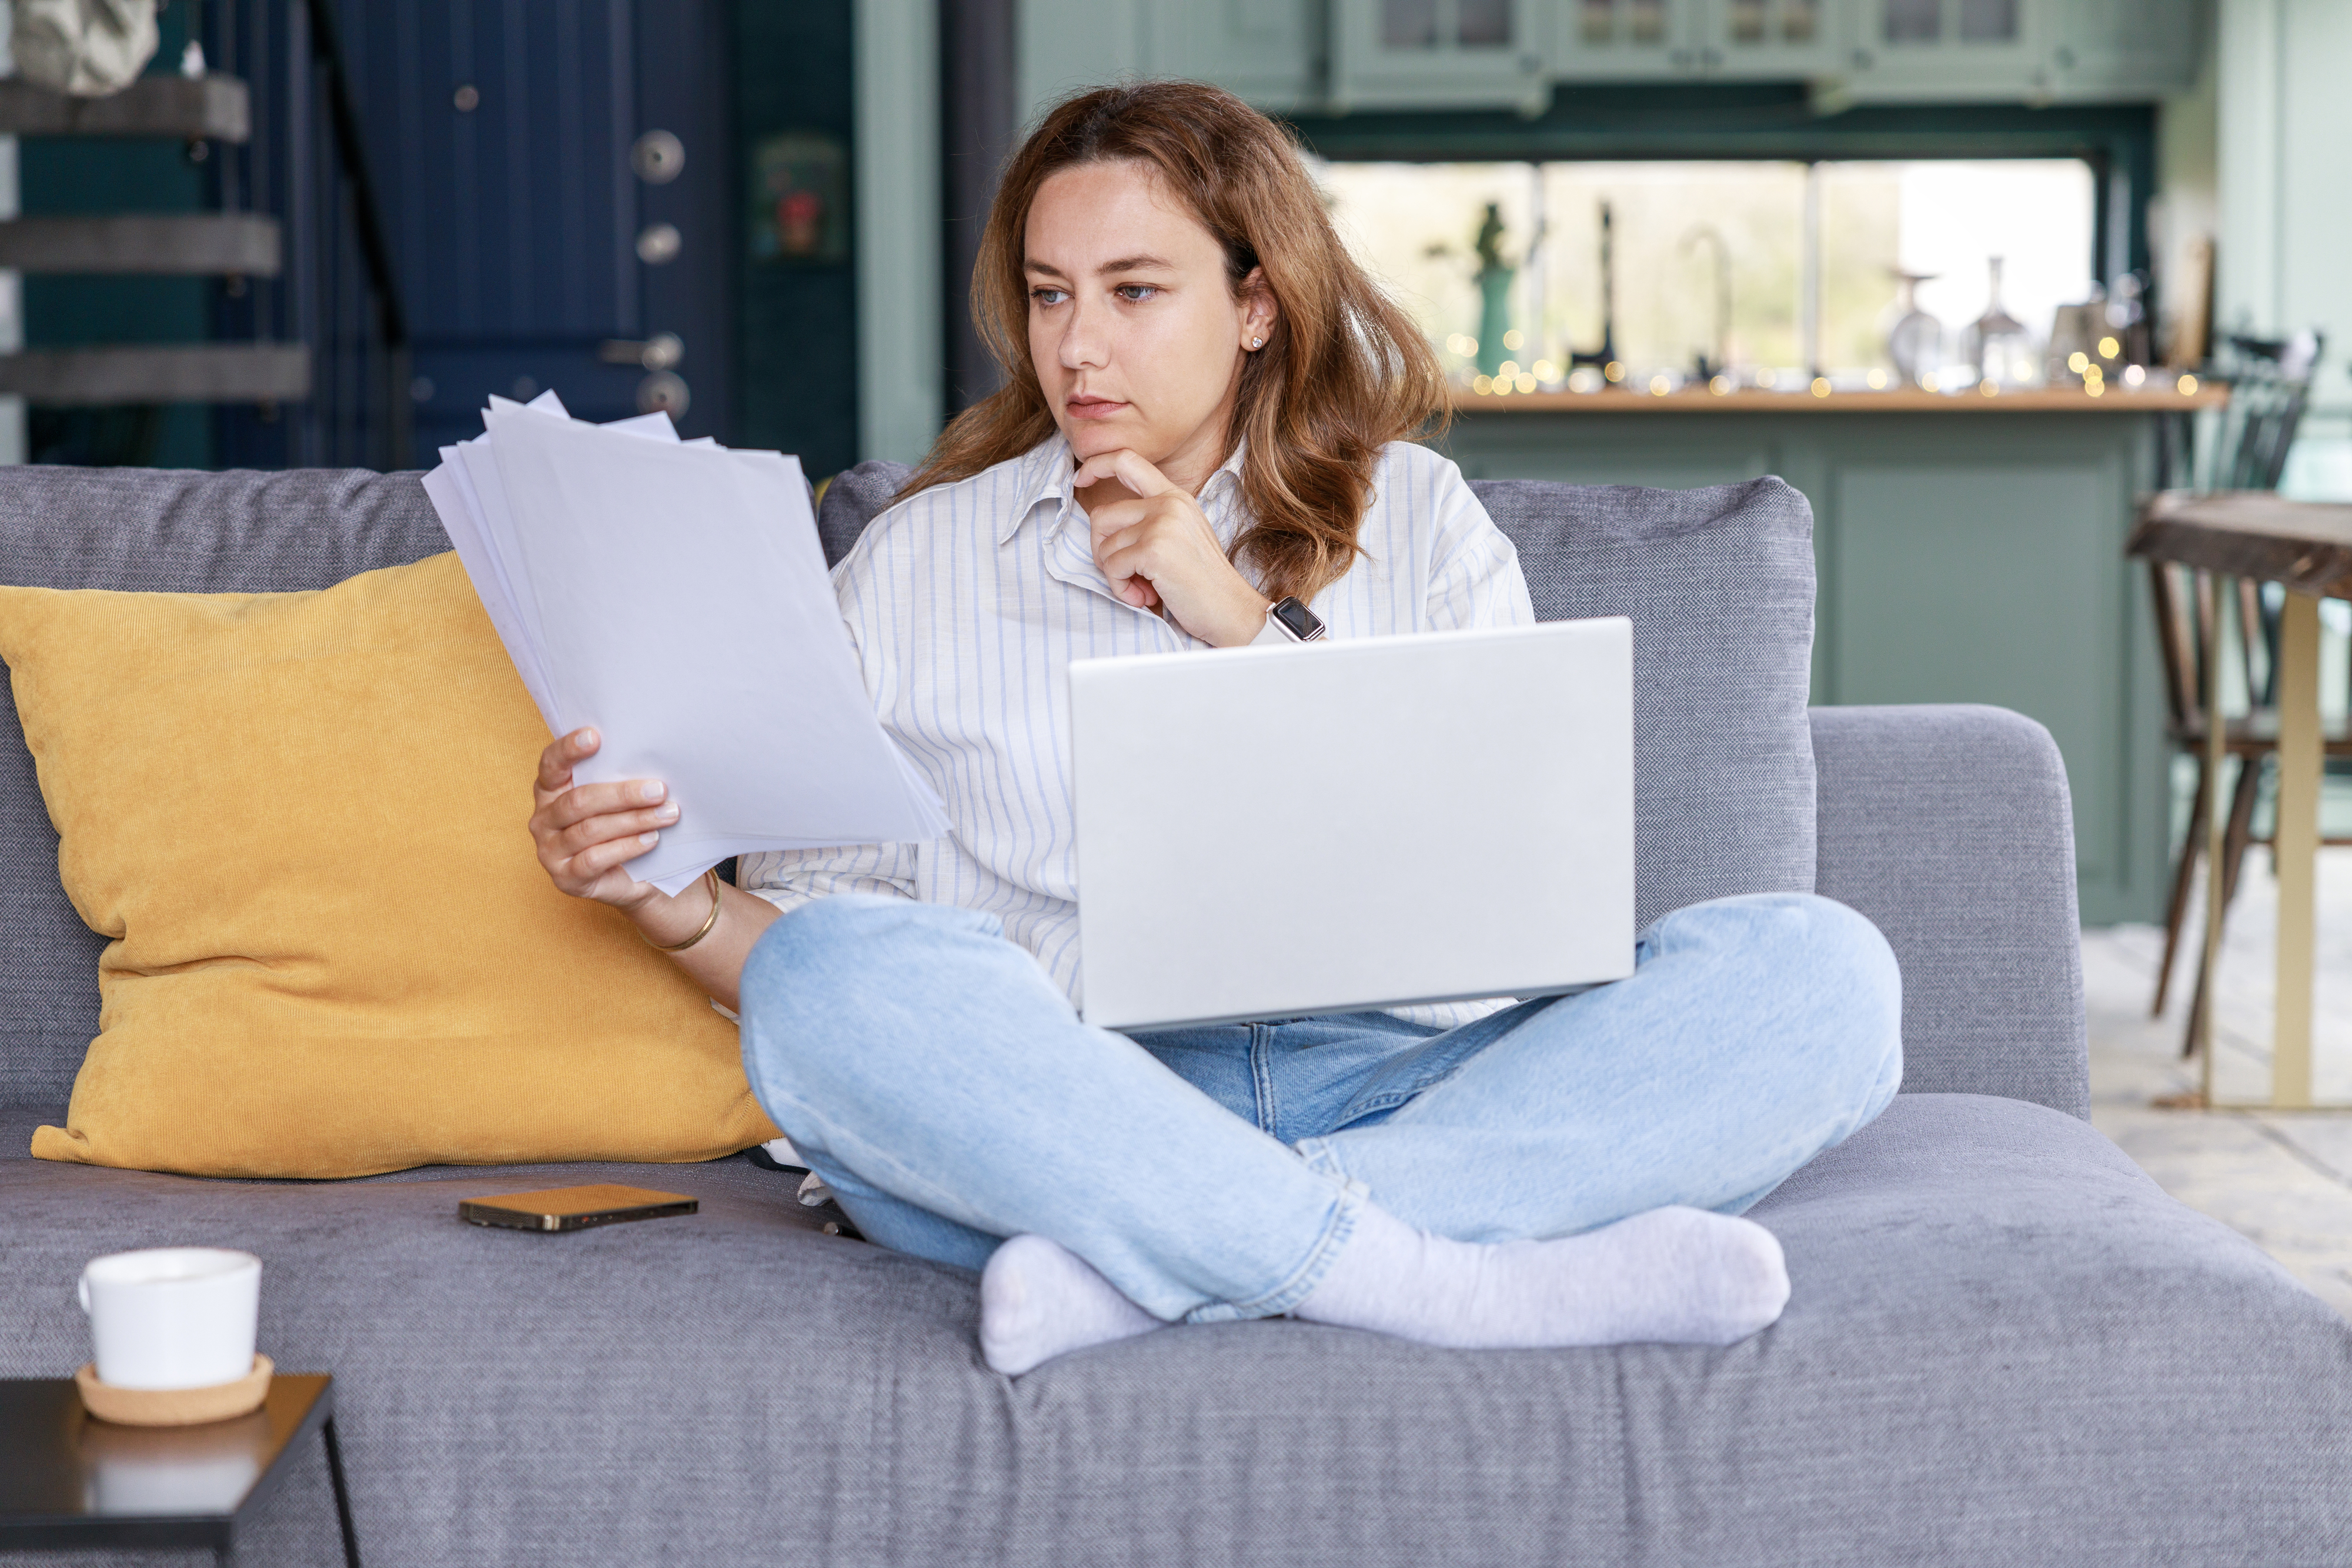 A person sits on a couch with a laptop on their lap, holding and examining a stack of papers with a thoughtful expression